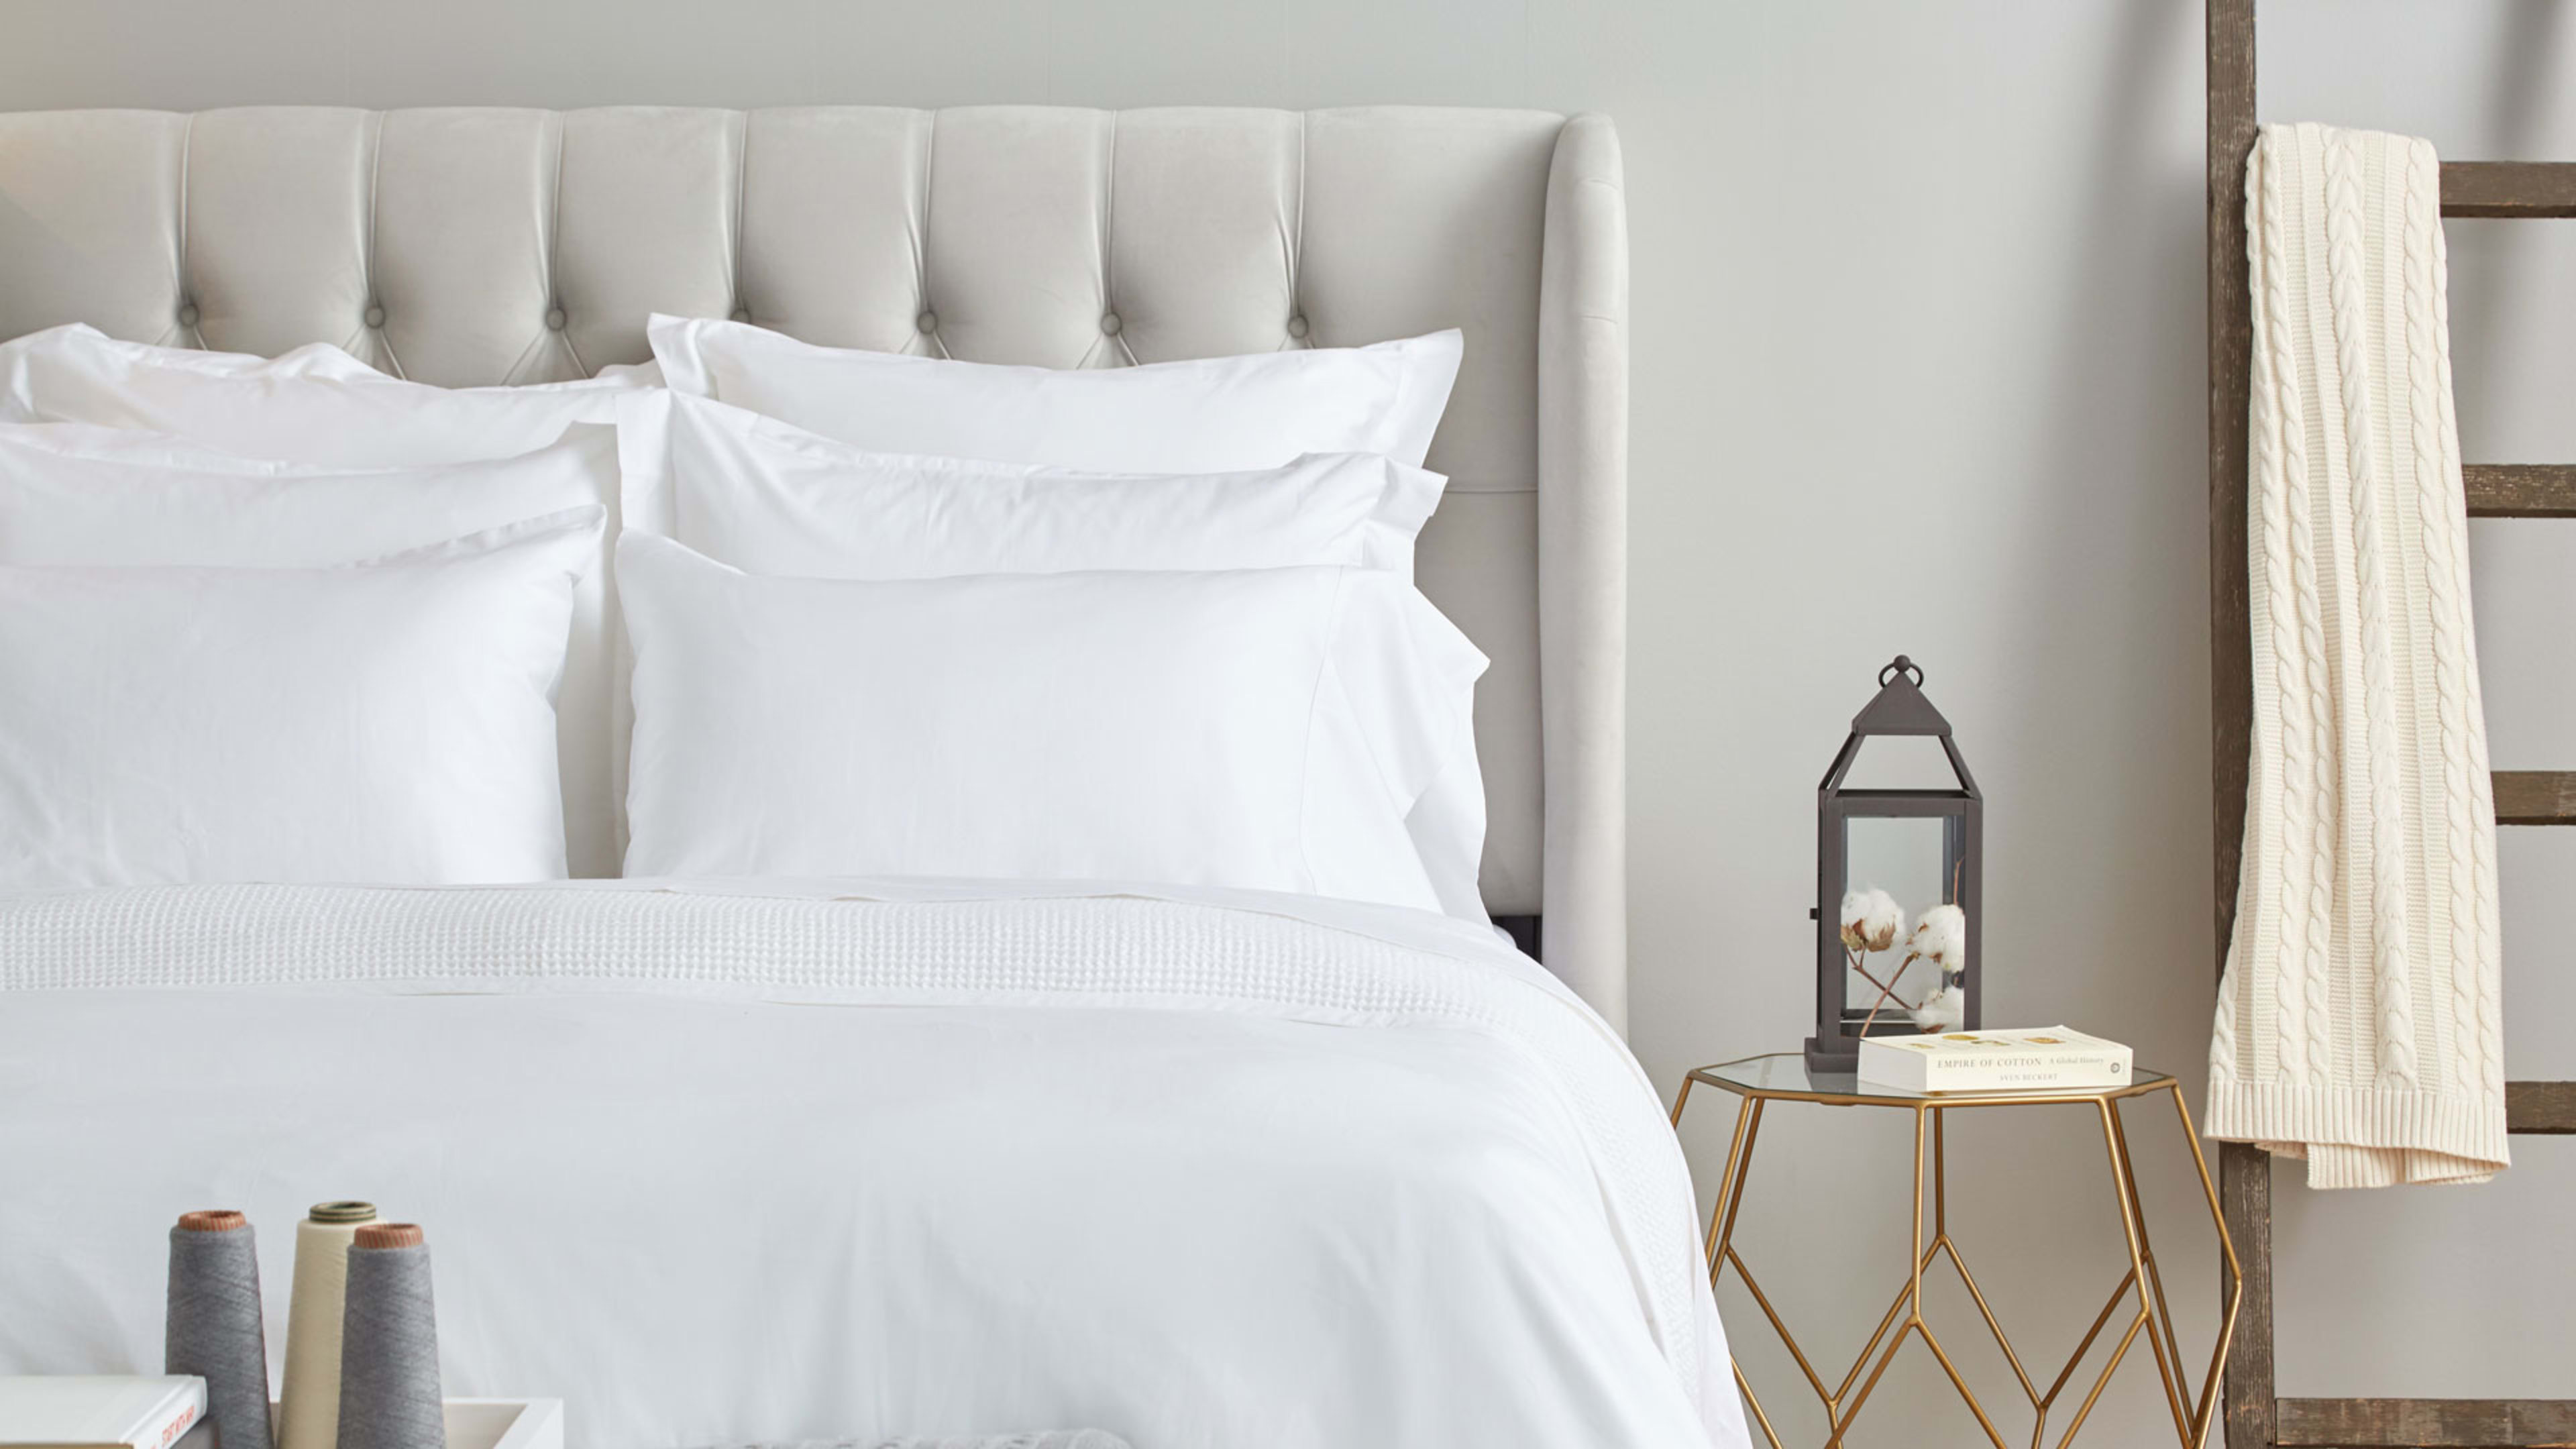 This bedsheets startup is the world’s fastest growing consumer of organic cotton